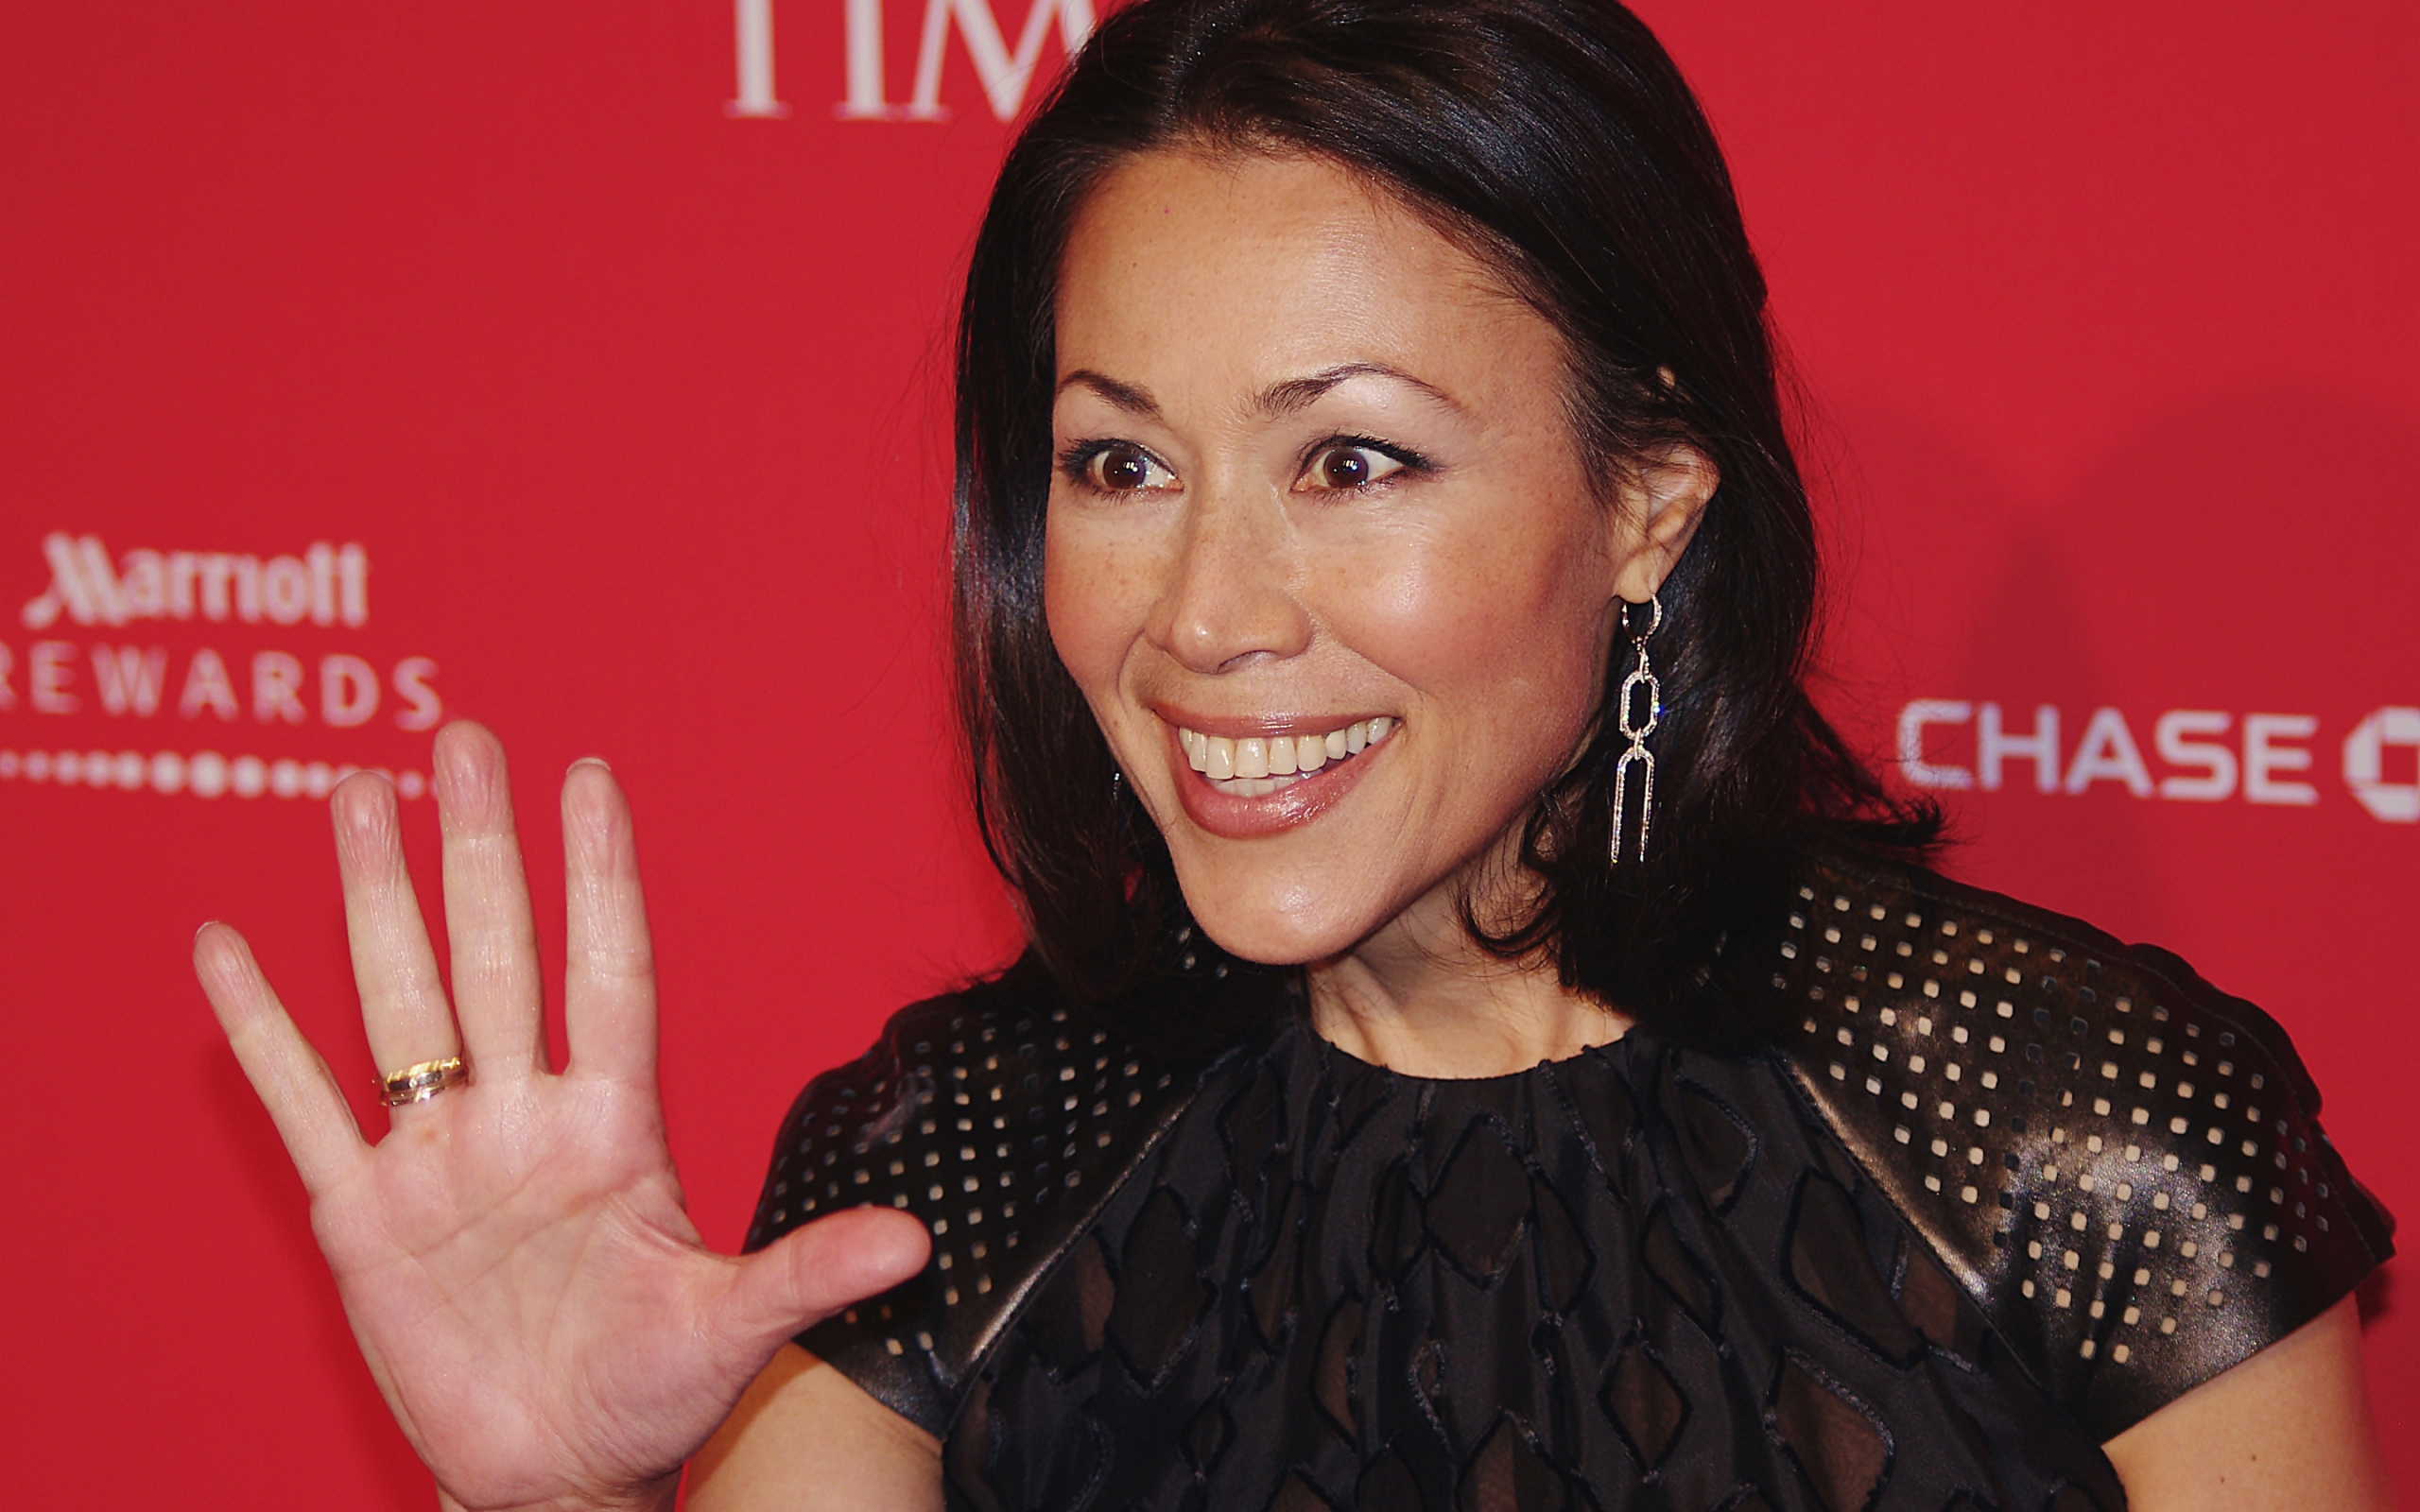 Ann Curry Look for 2560 x 1600 widescreen resolution